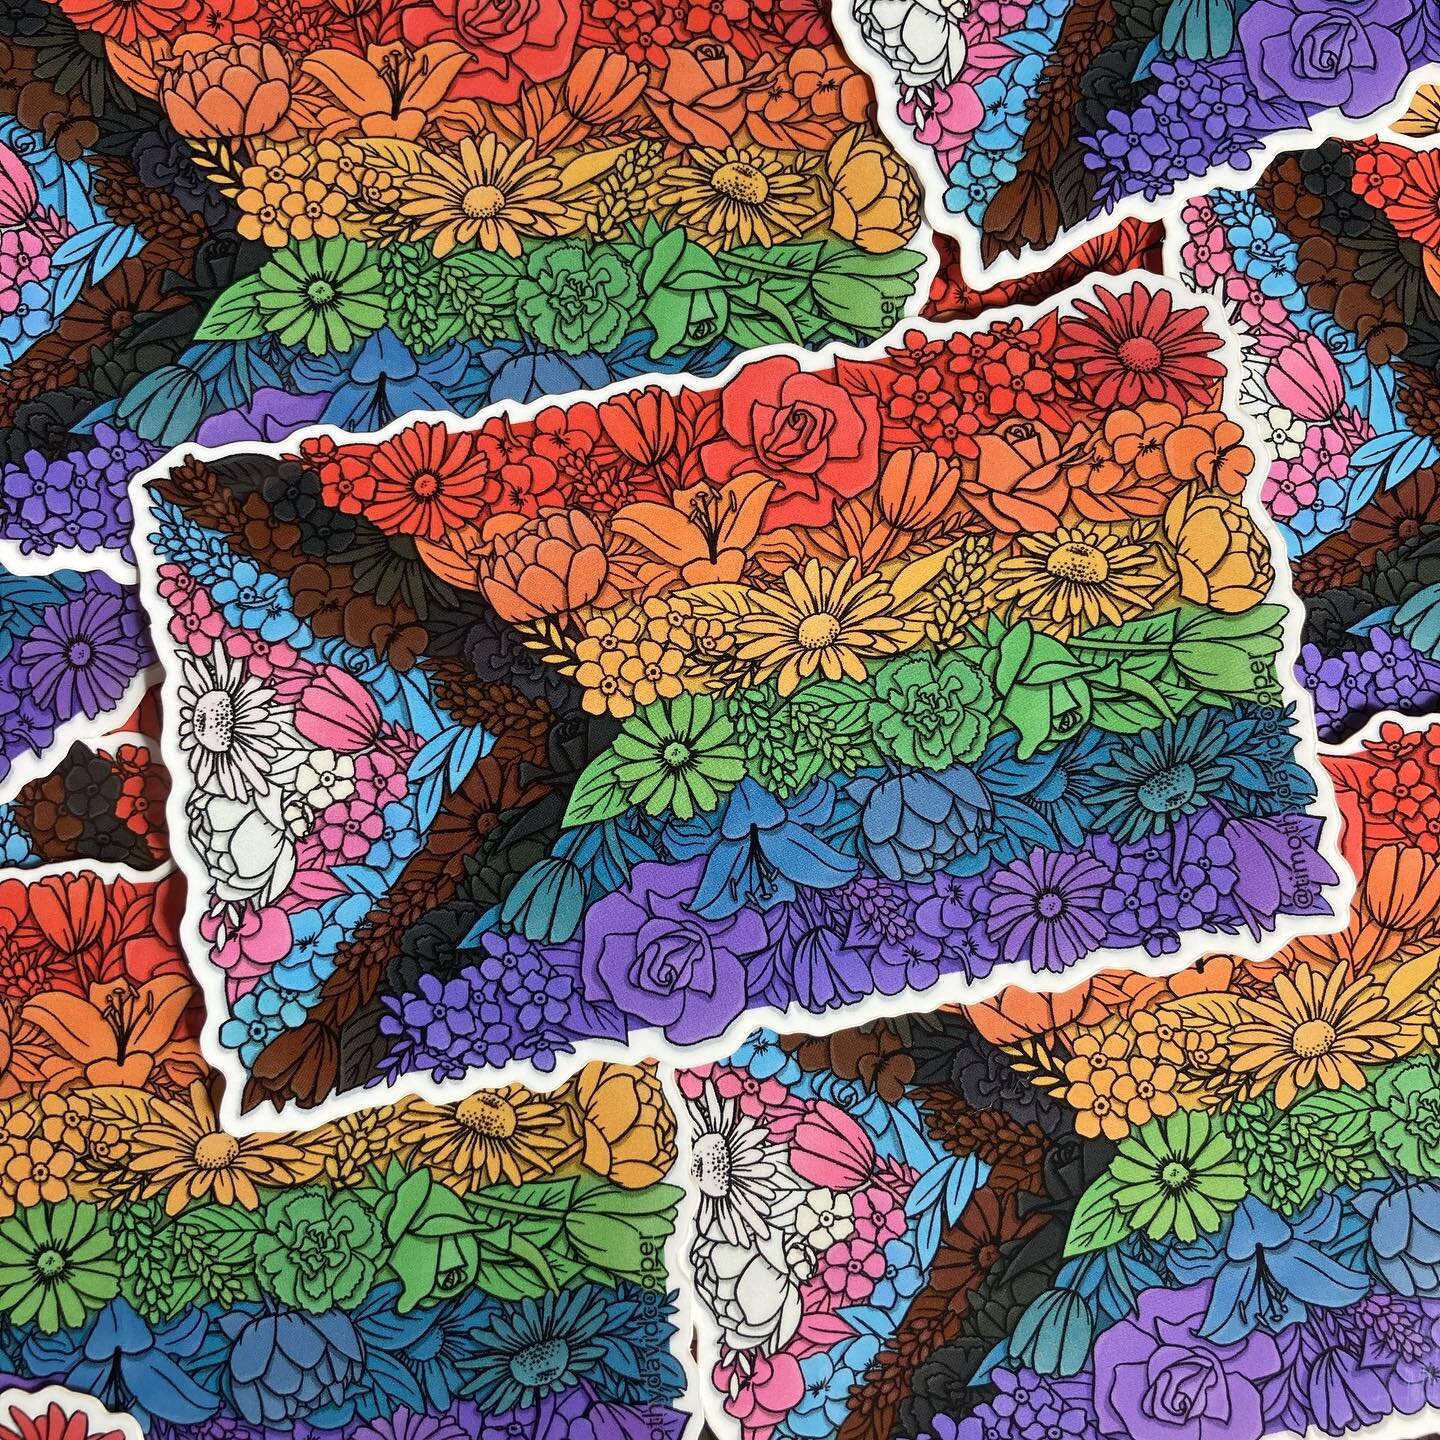 I have truly had so much fun creating my new Pride collection for the @towergrovepride festival, and I&rsquo;m thrilled to be able to start sharing some of the collection with you! First up are these floral Progress Pride flag stickers. 🏳️&zwj;🌈💐?